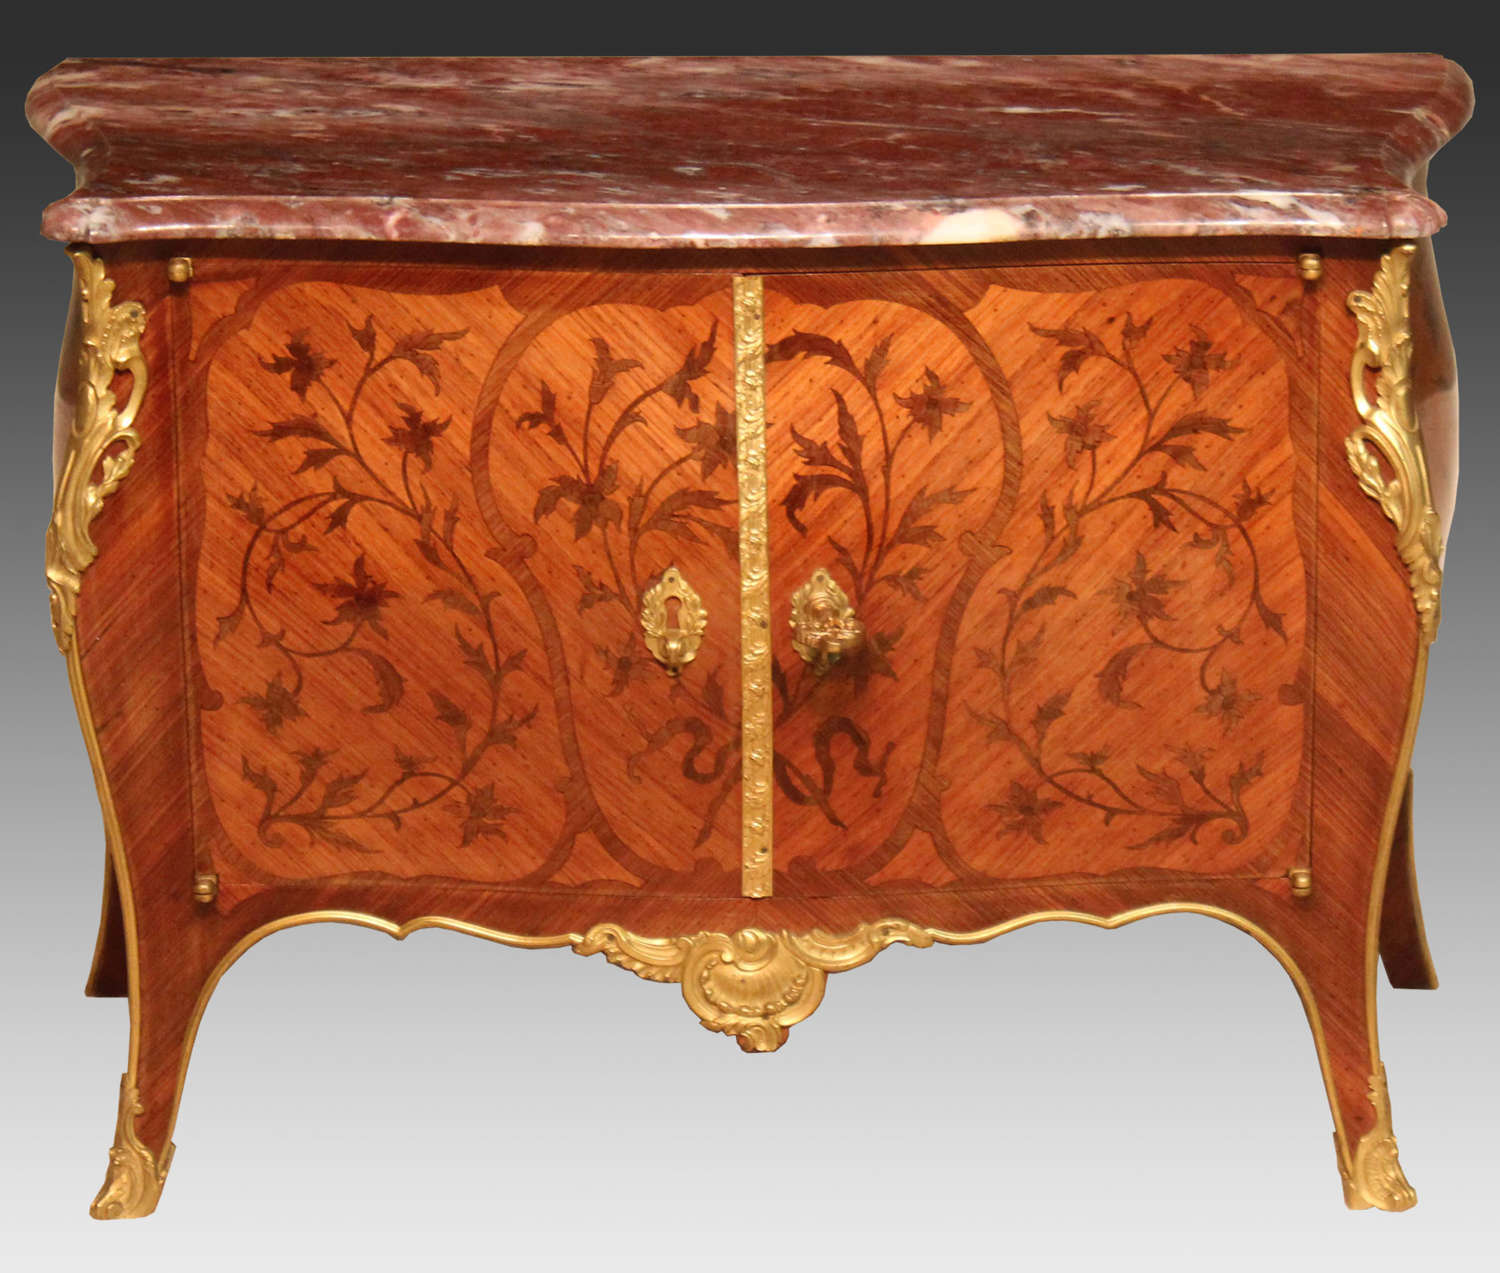 An Early 20th century Kingwood and Ormolu mounted table top commode